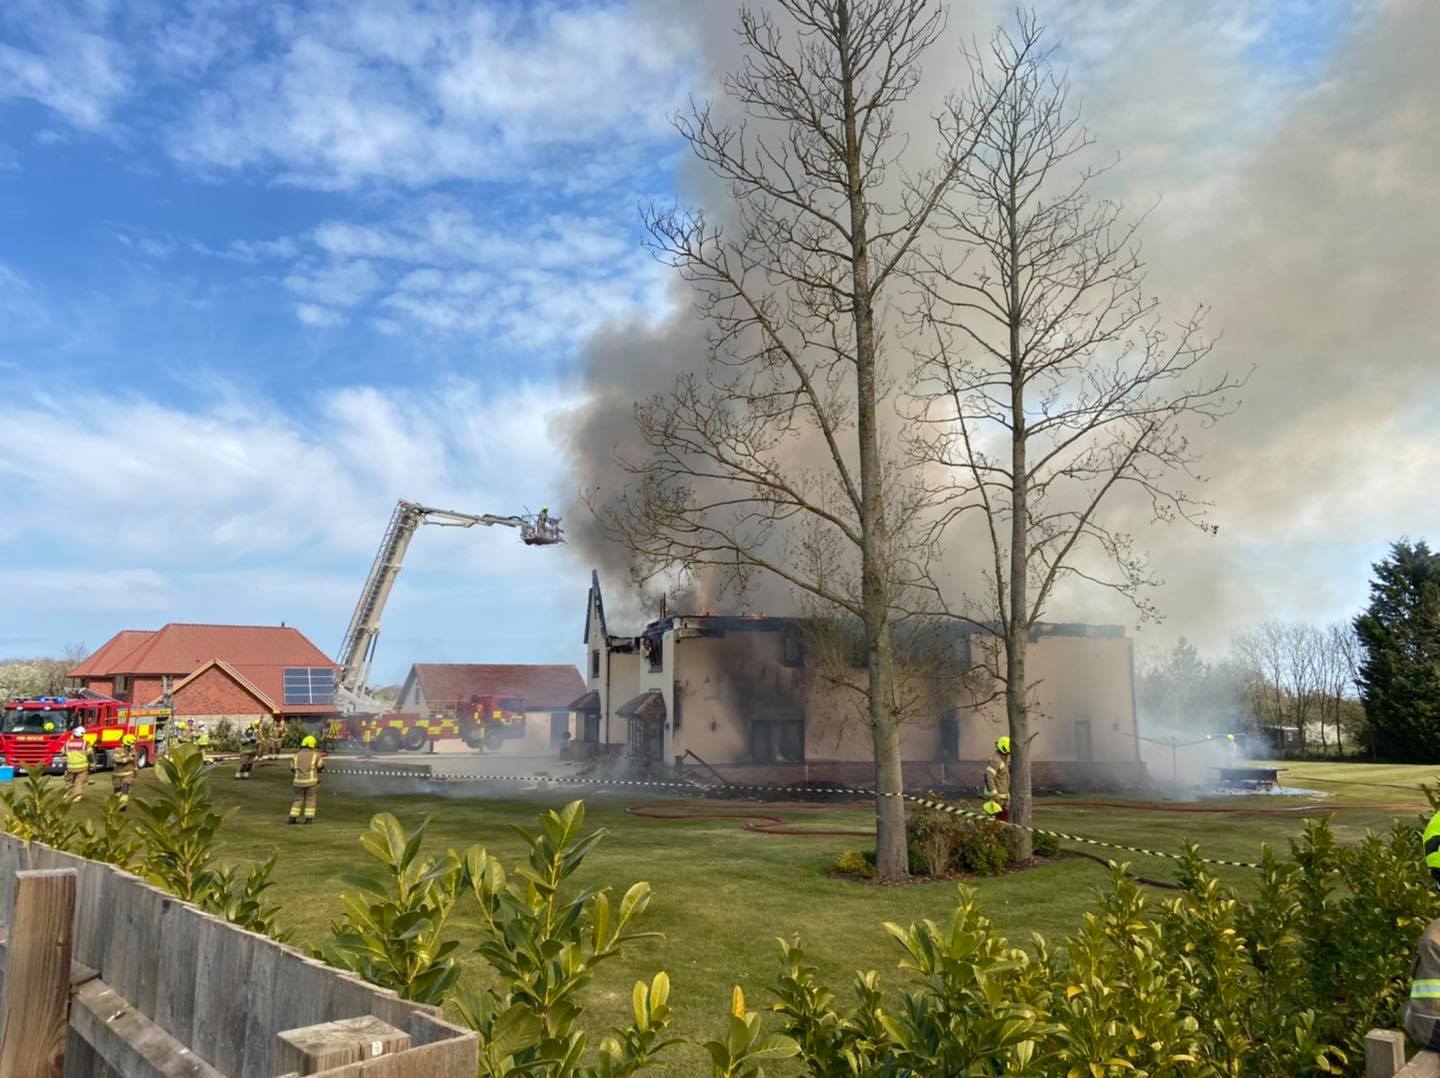 House fire at Tolleshunt Knights. Photo - Maldon Fire Station